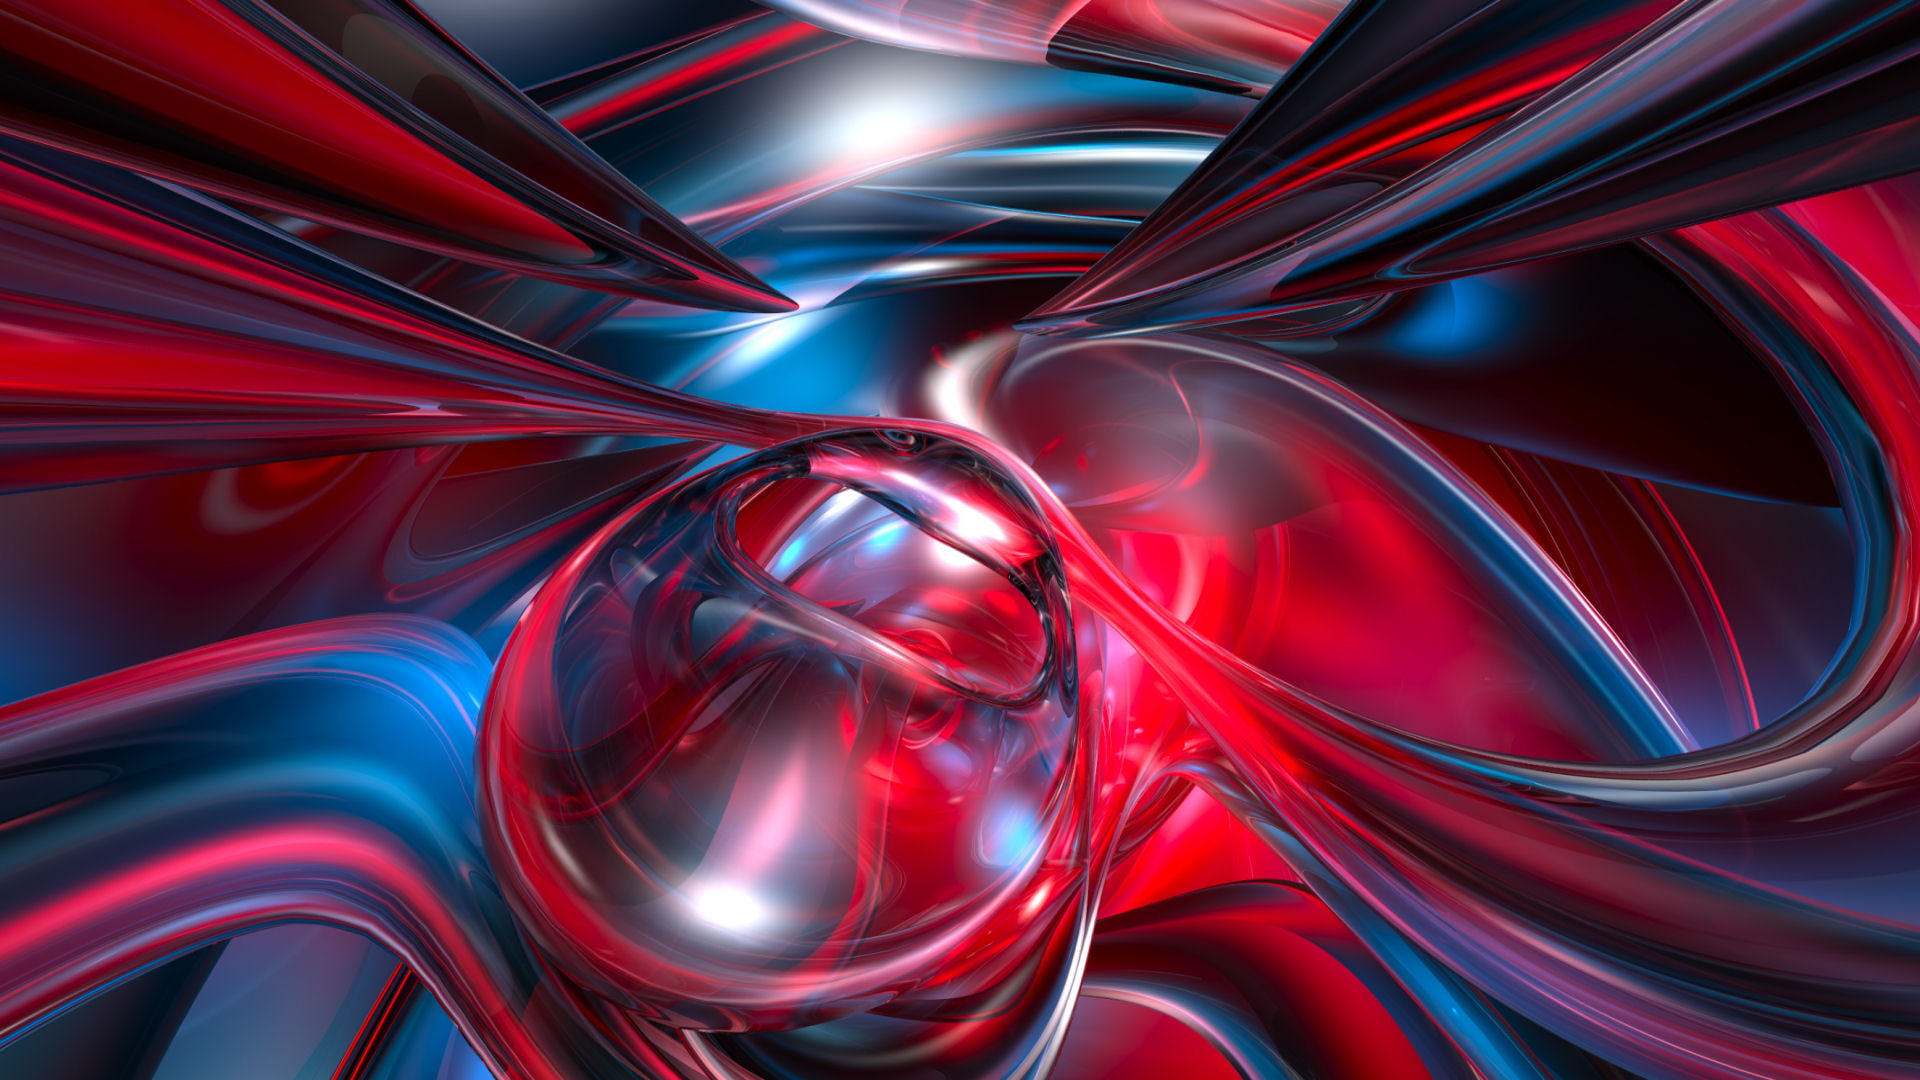 Abstract, Liquid, Colorful, red and blue illustrationb